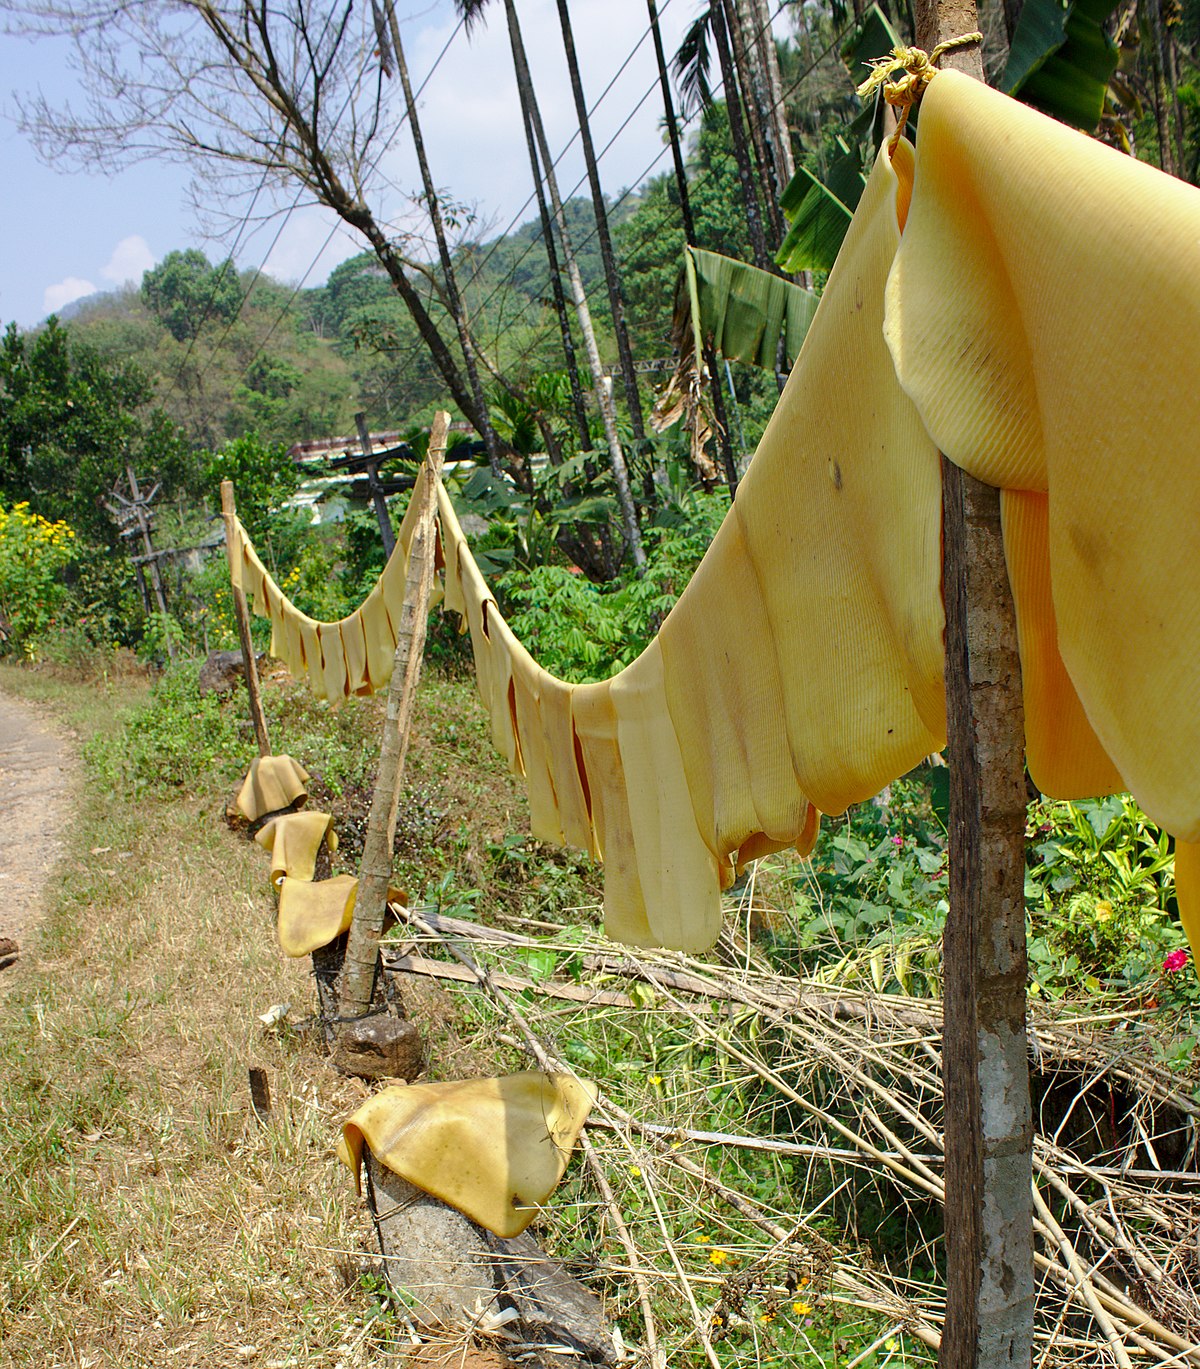 https://upload.wikimedia.org/wikipedia/commons/thumb/f/f7/Natural_rubber_drying_2.jpg/1200px-Natural_rubber_drying_2.jpg